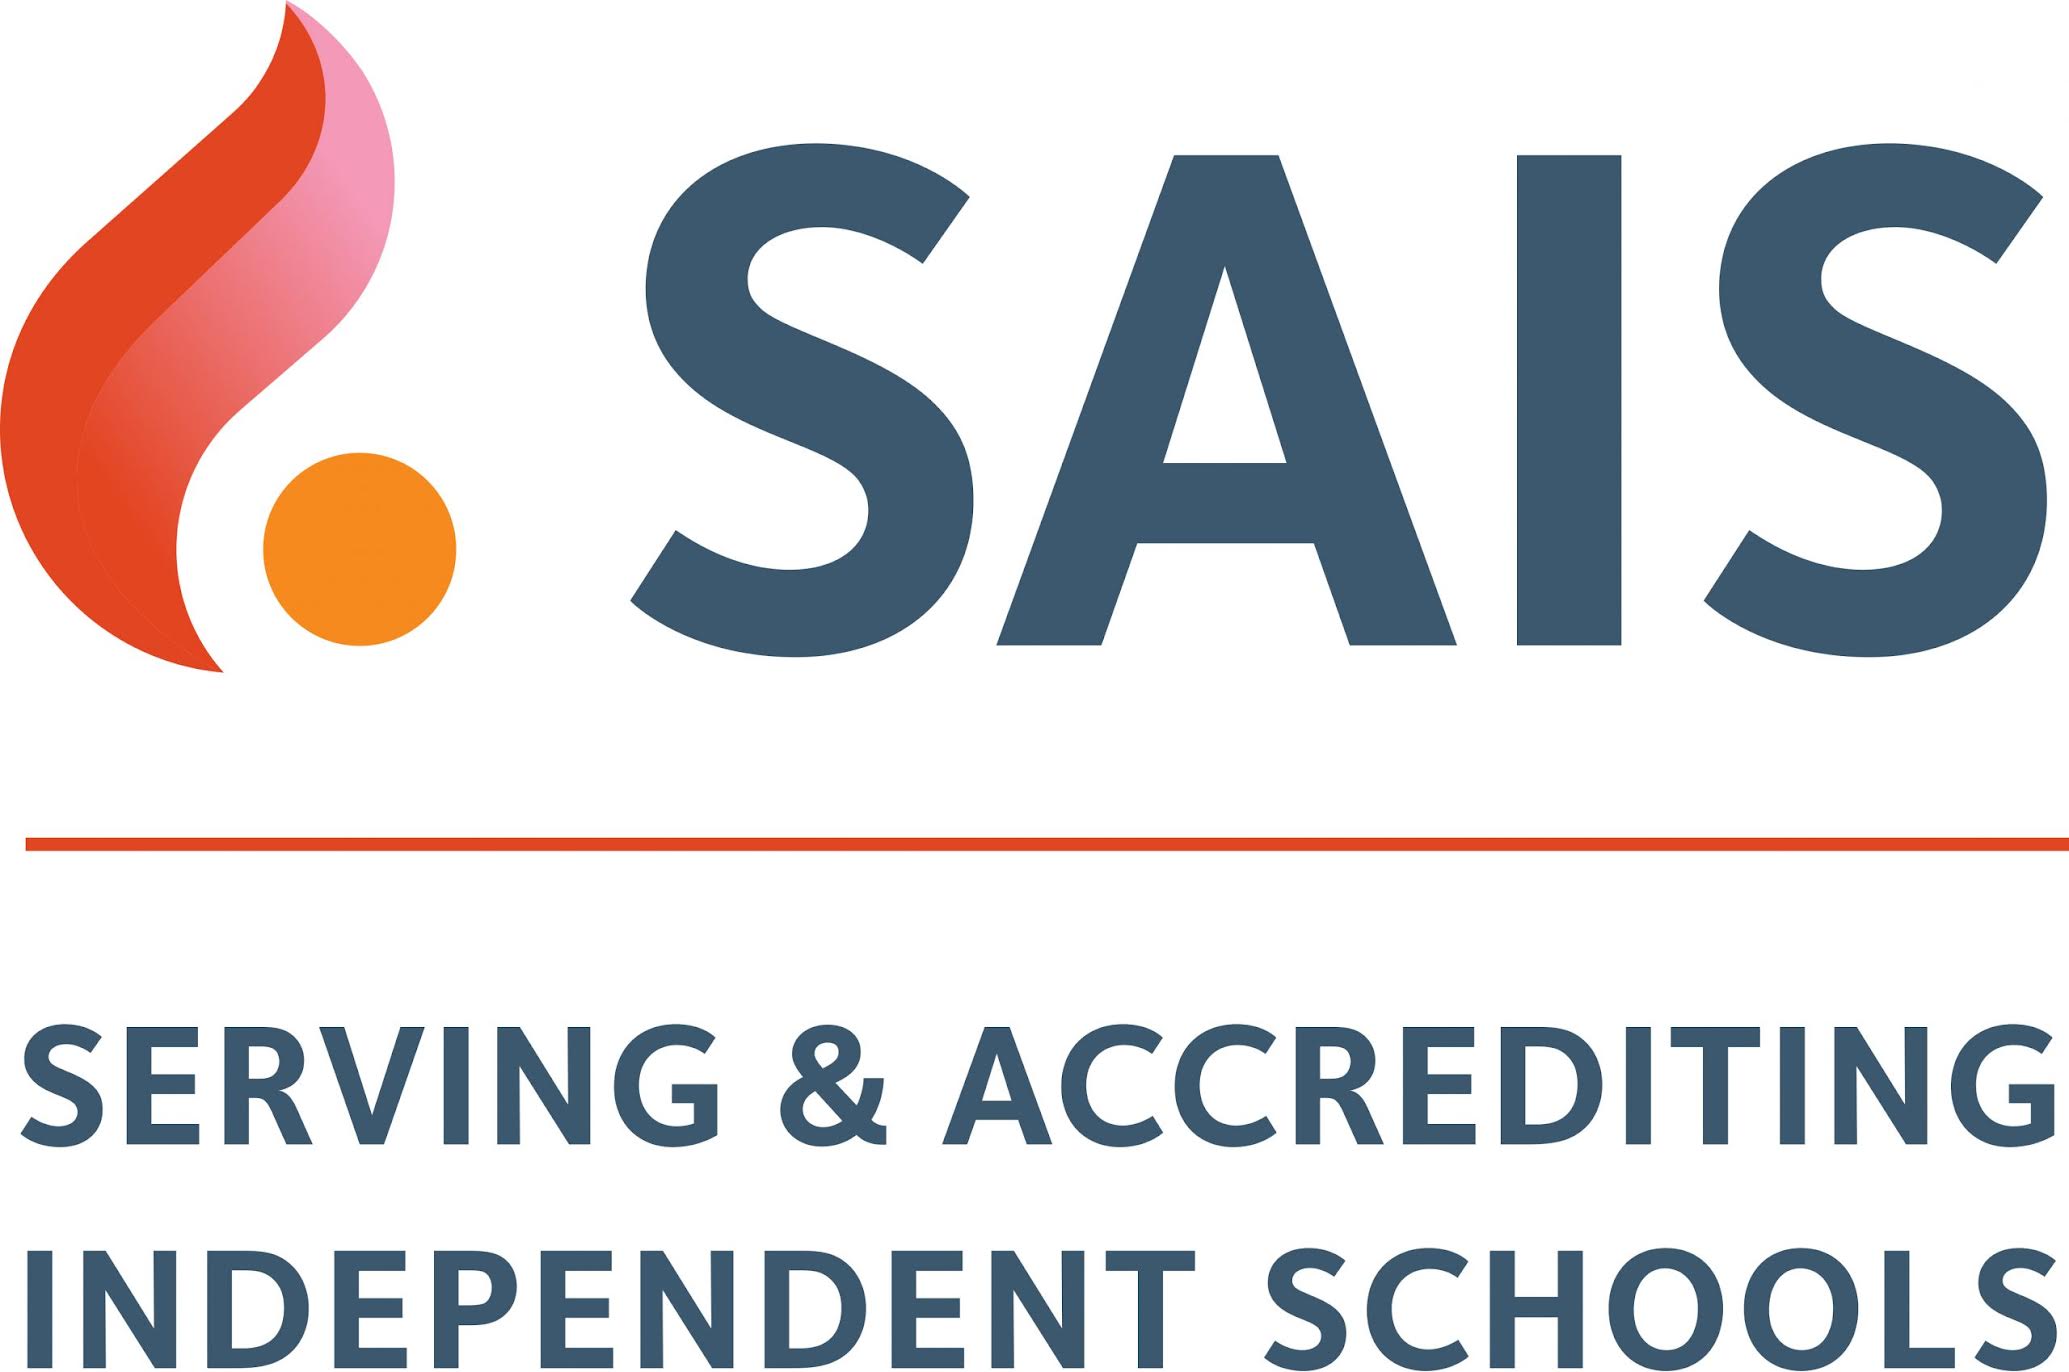 Serving and Accrediting Independent Schools